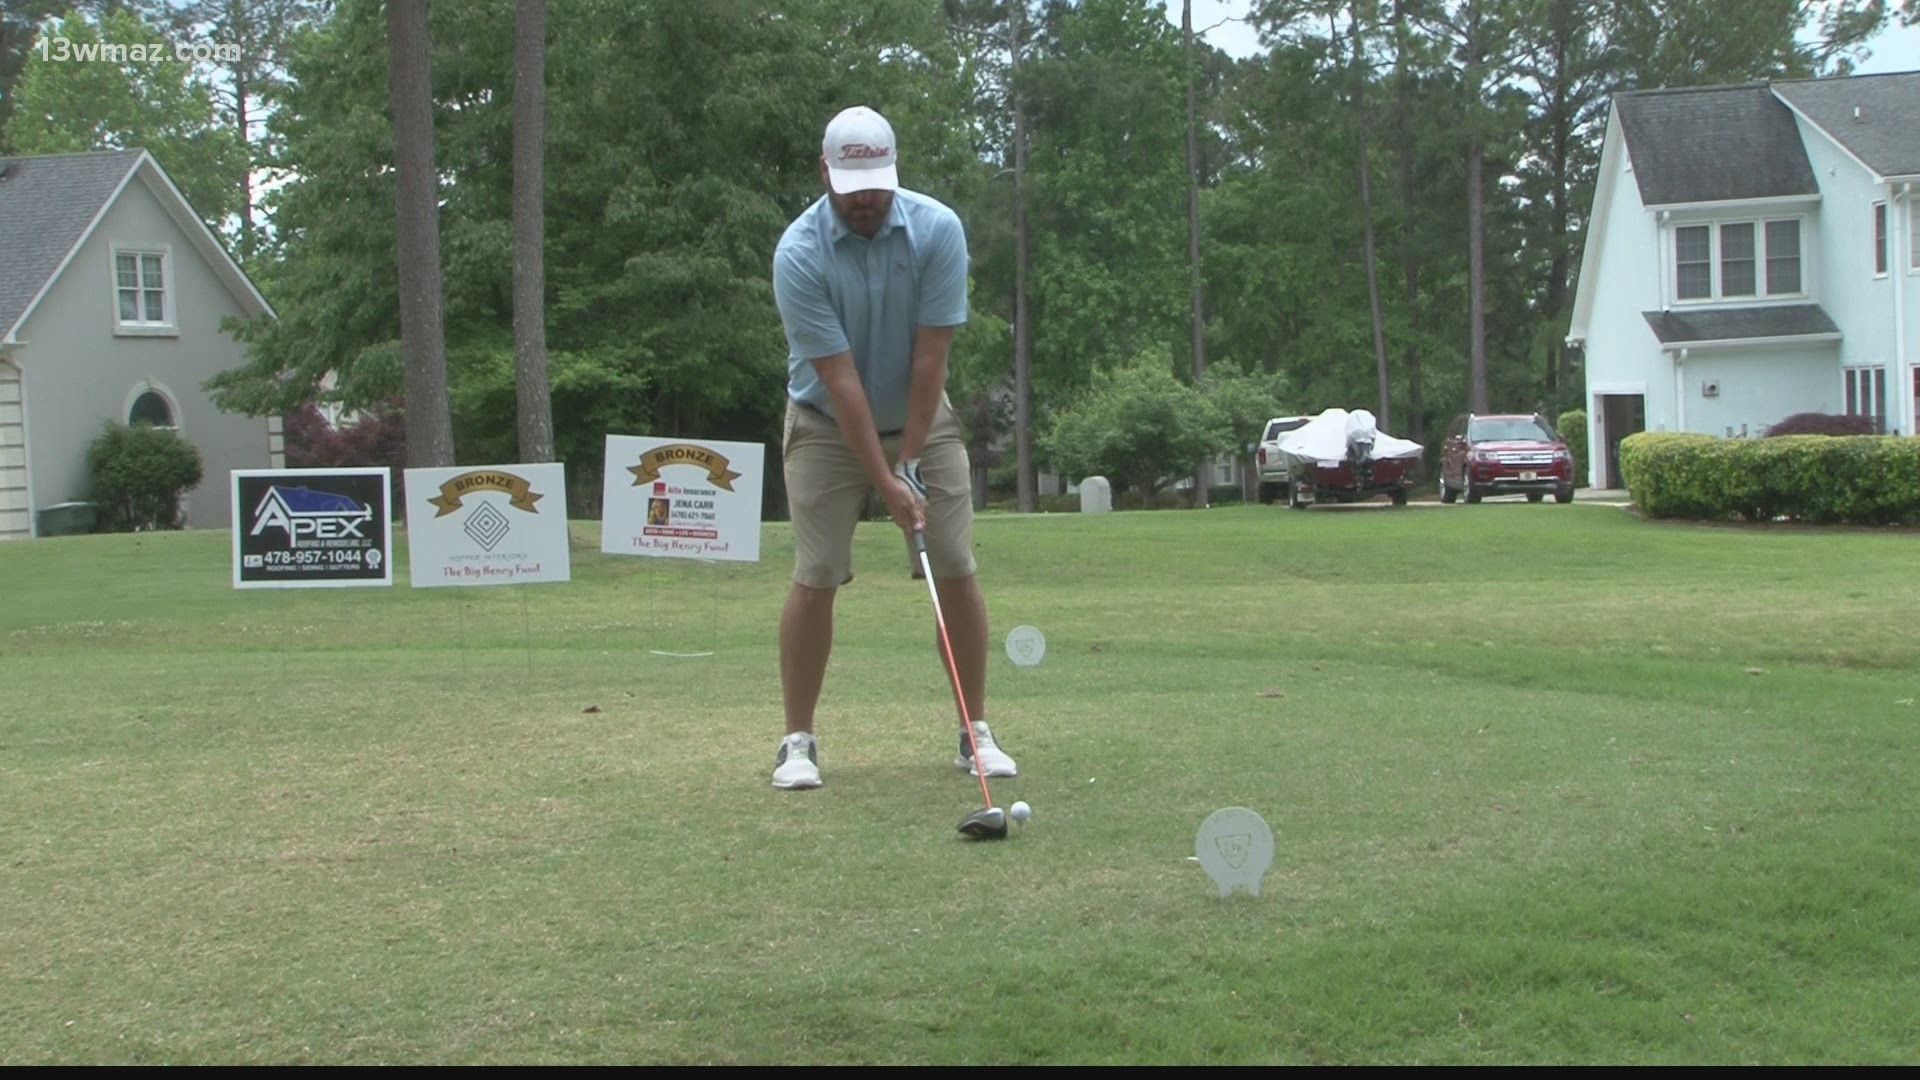 A Macon organization is using the game of golf to help children in need.